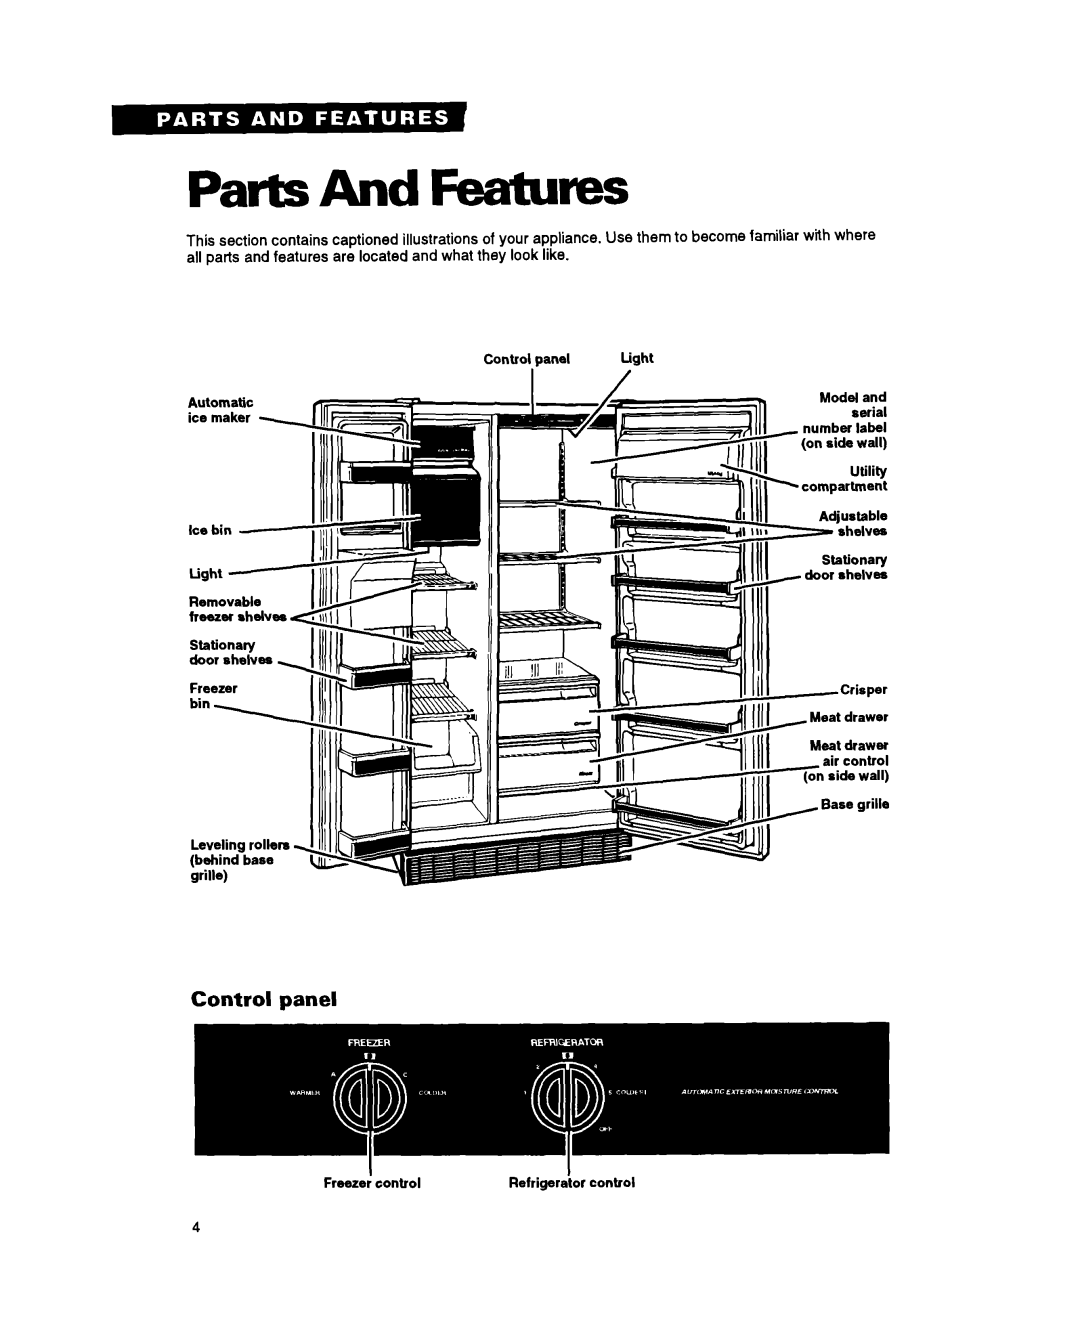 Whirlpool TS22BR warranty Parts And Fea%wes, Control panel Model and, Leveling rollers behind base grille 